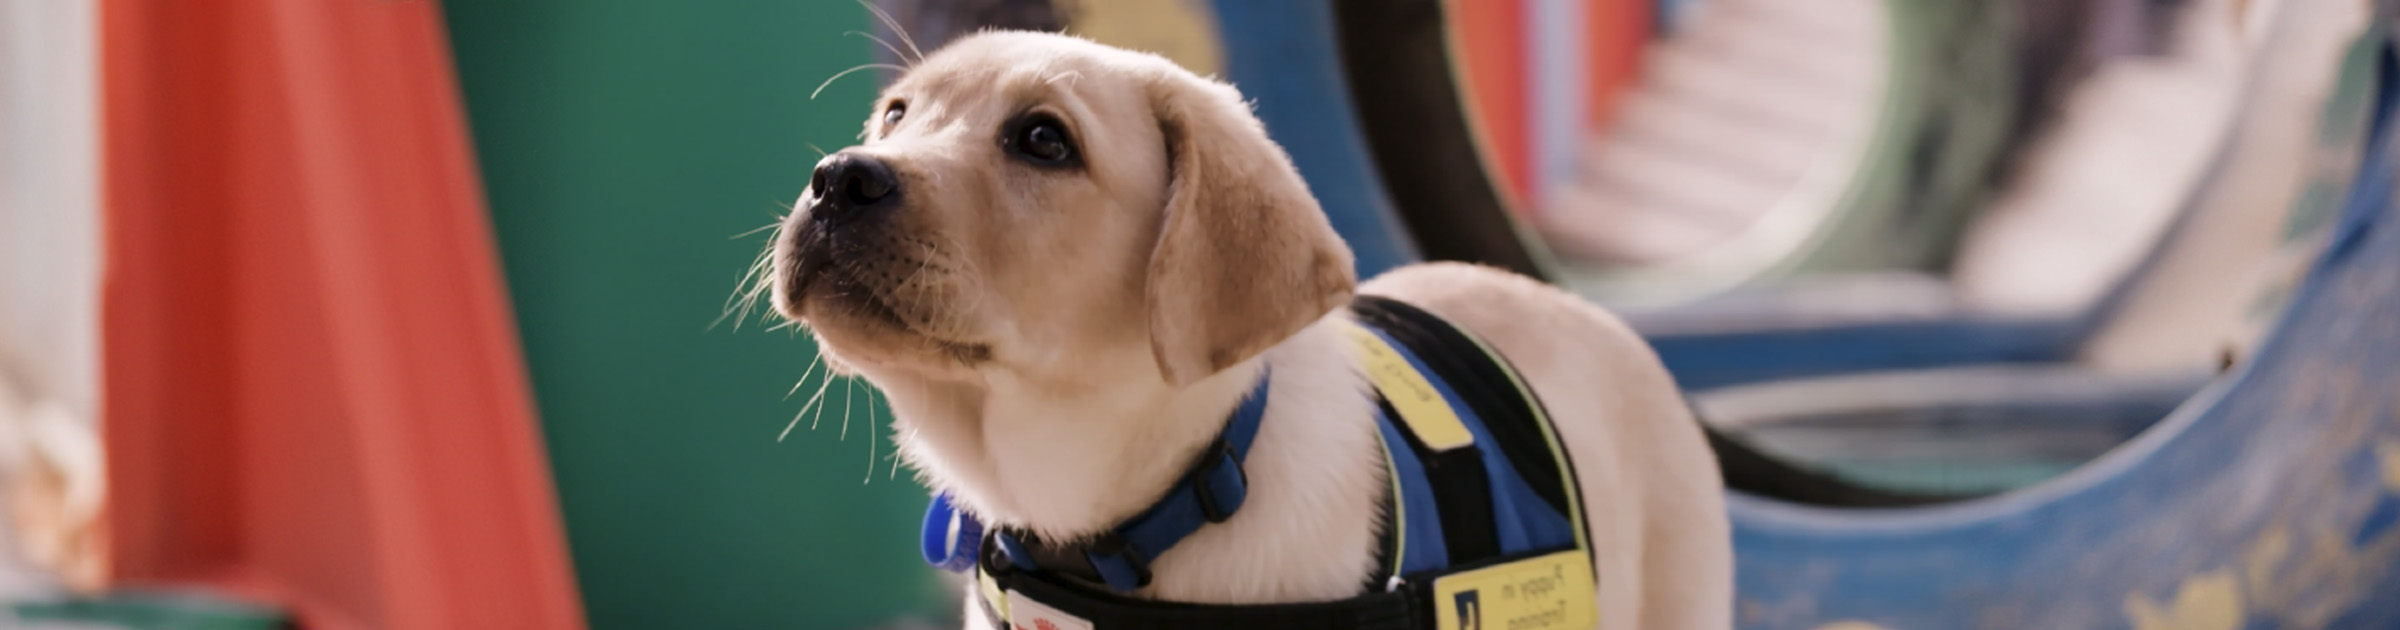 Seeing Eye Dog puppy in harness for training